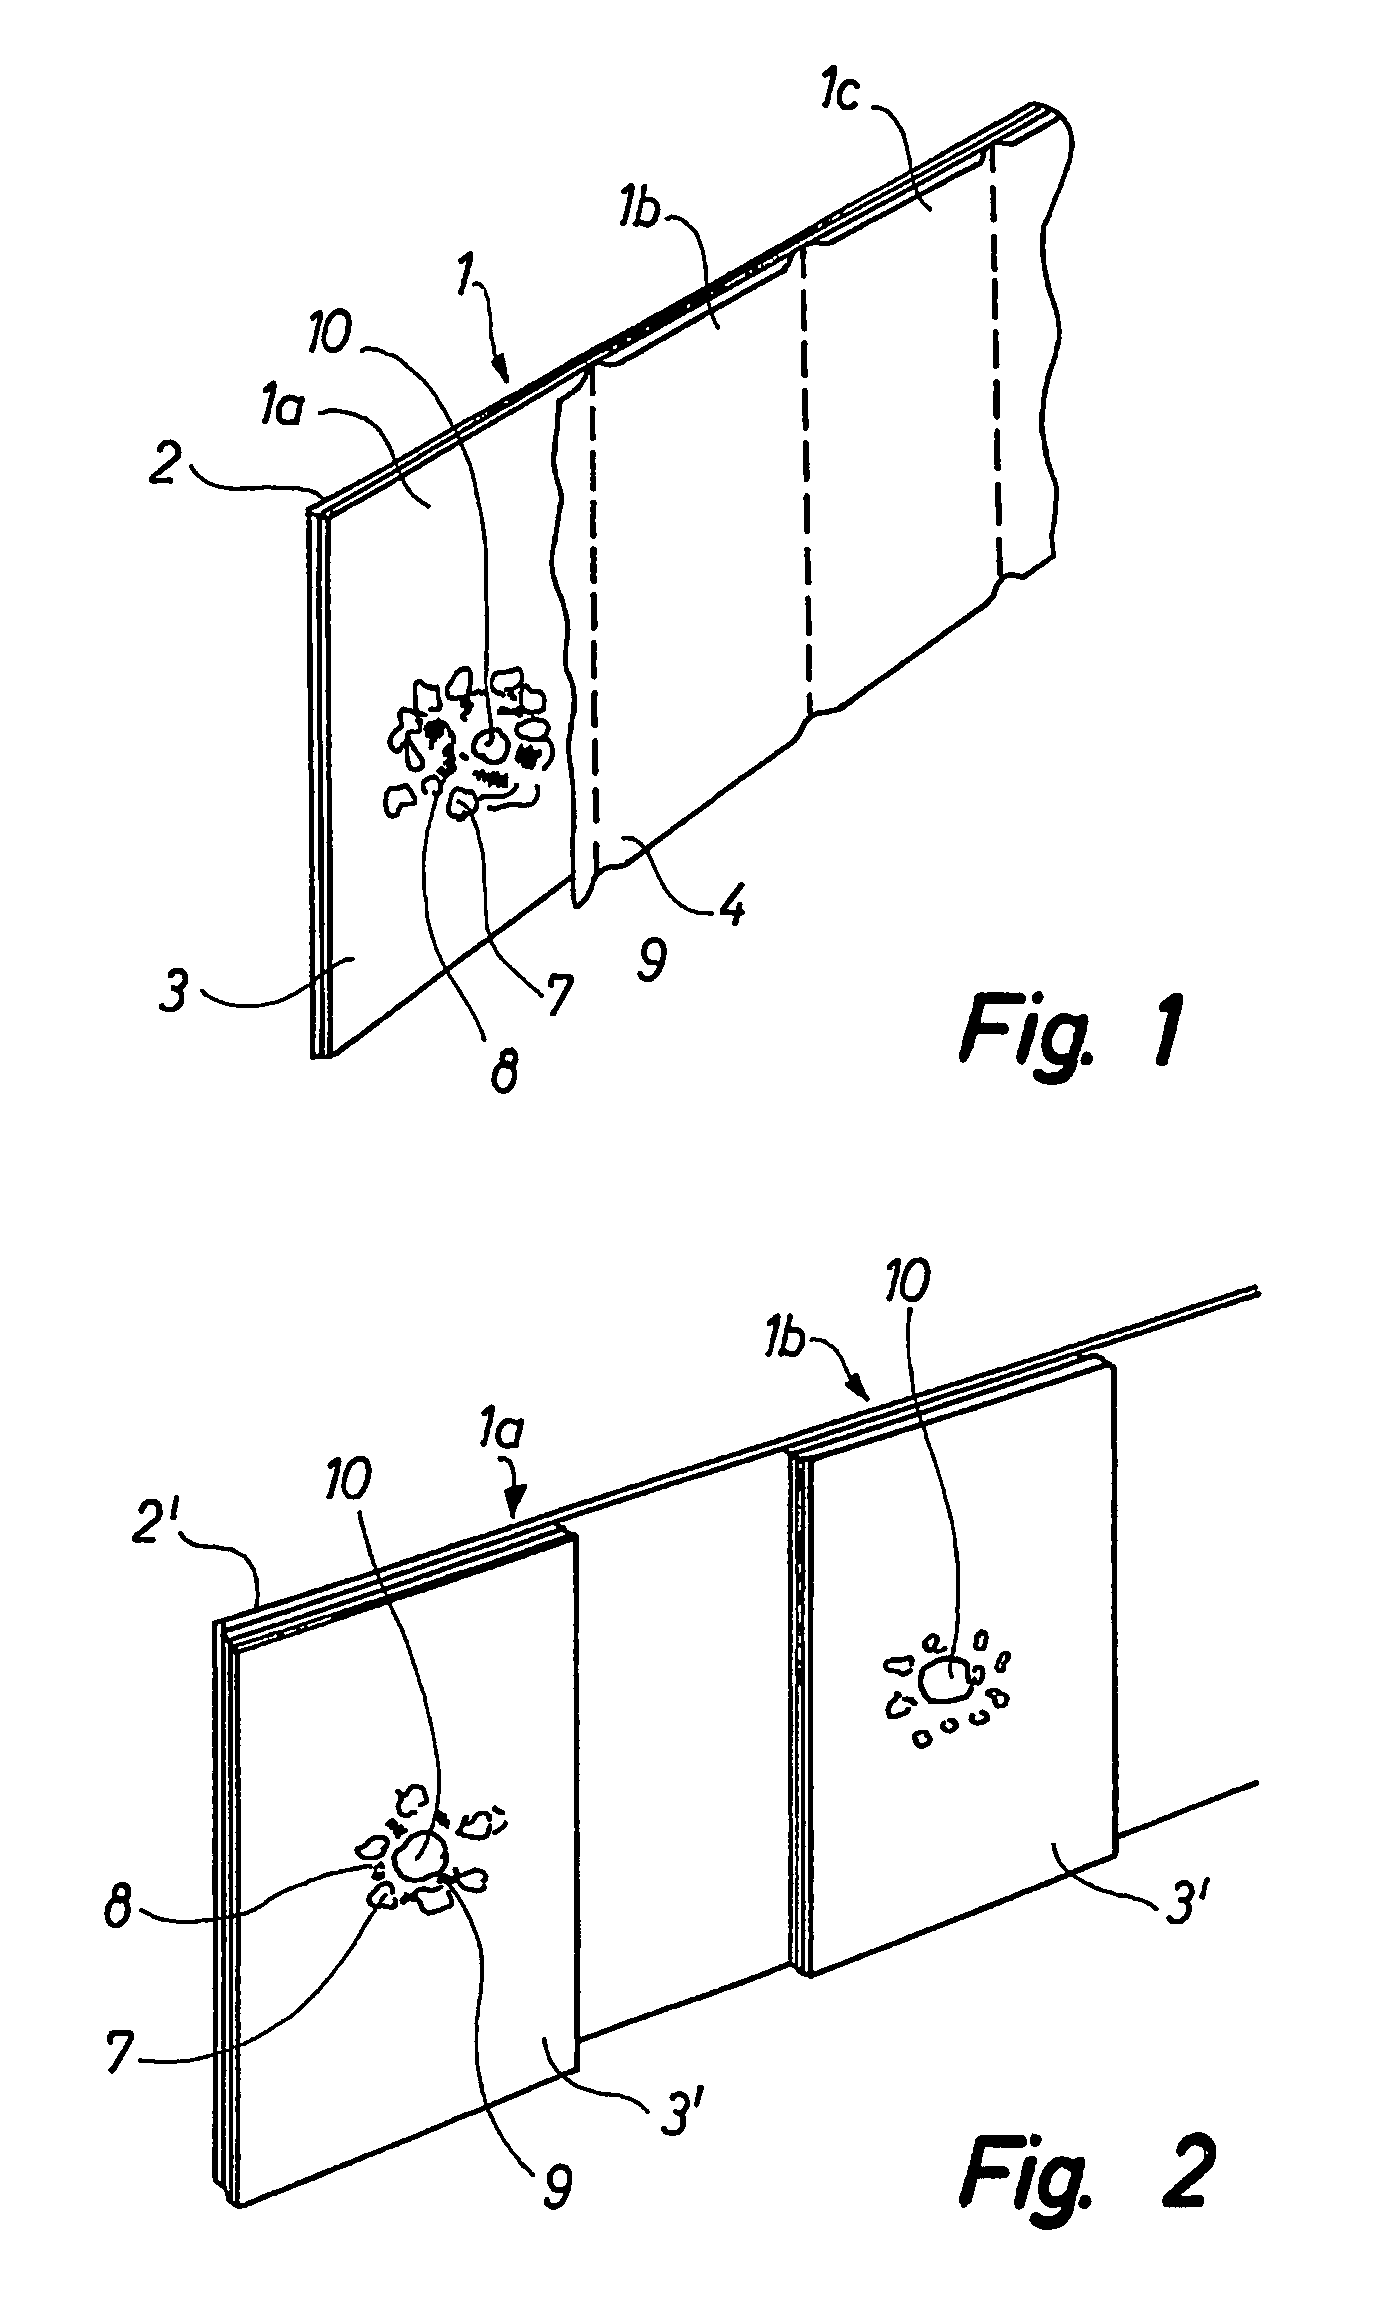 Seed tape including successively arranged germinating units as well as a method of germinating the seed tape